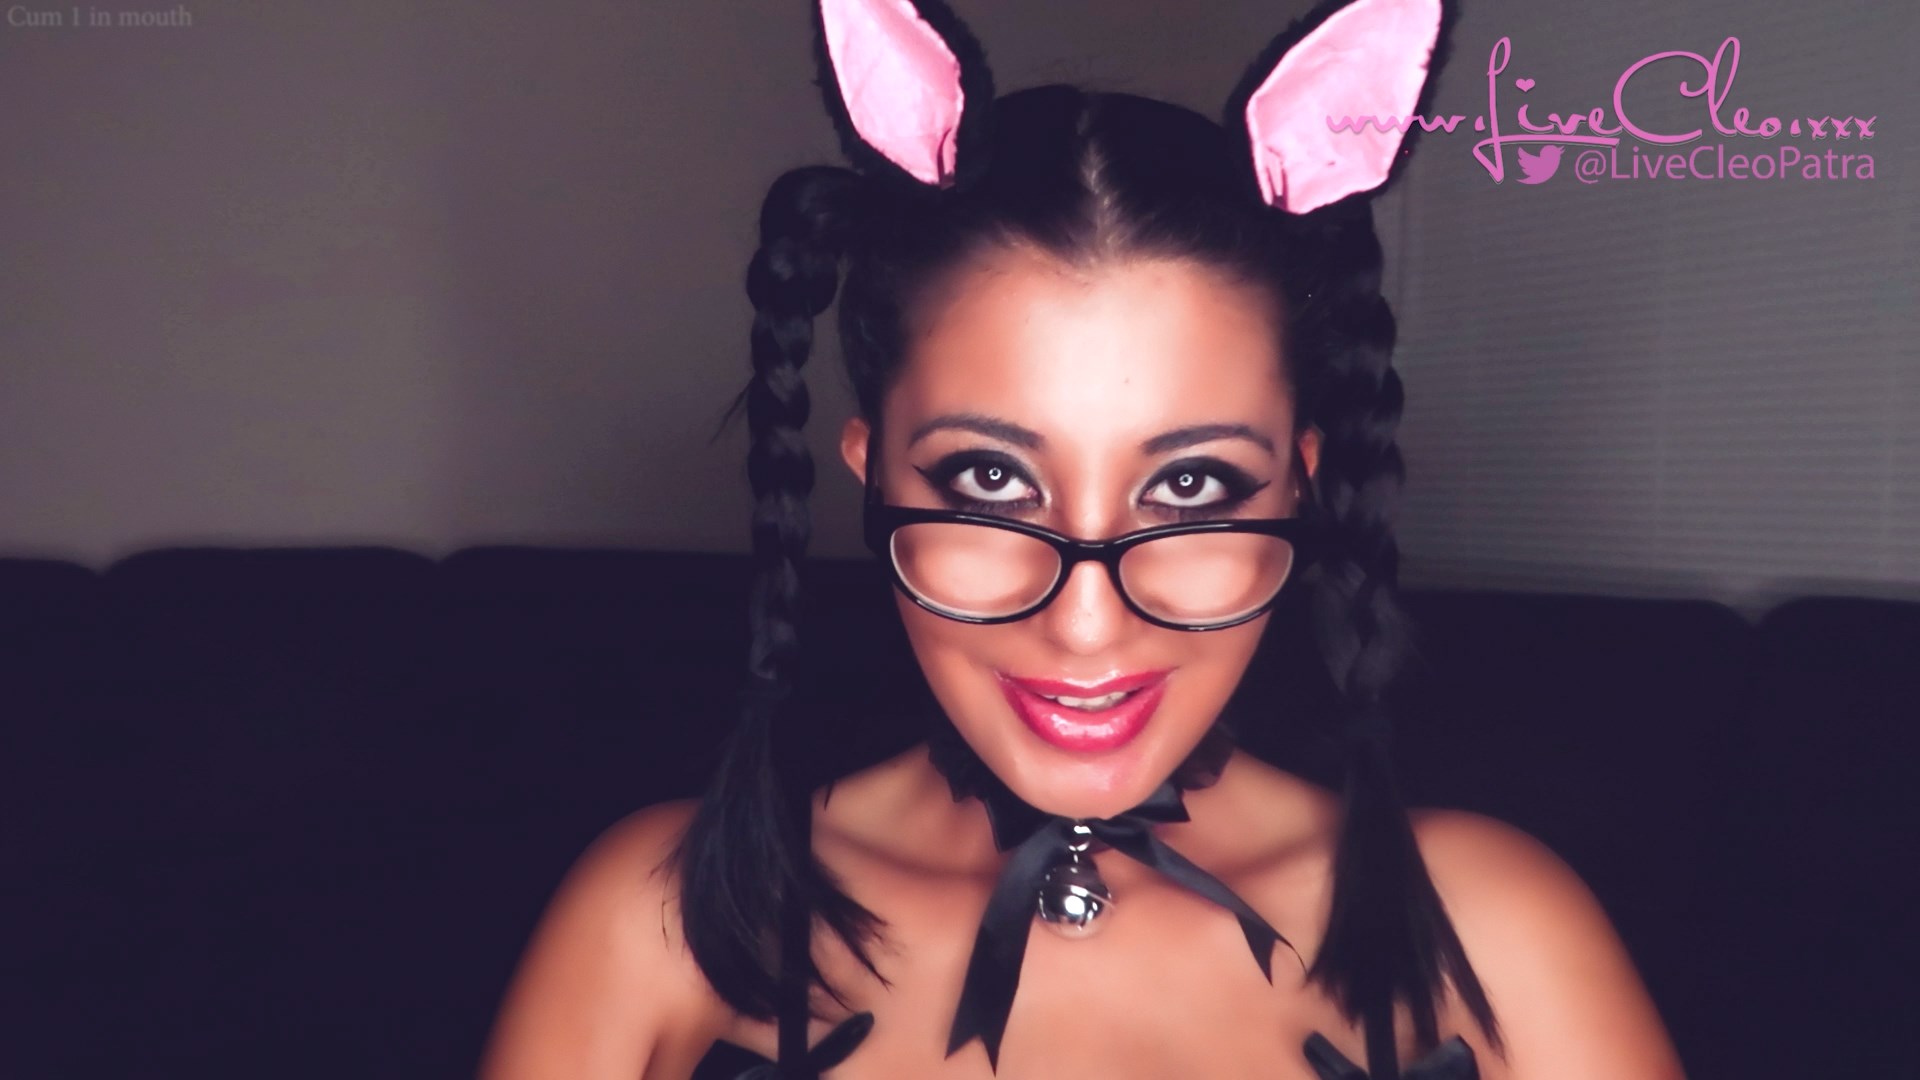 LiveCleo - Kitty needs milk in mouth & on big tits